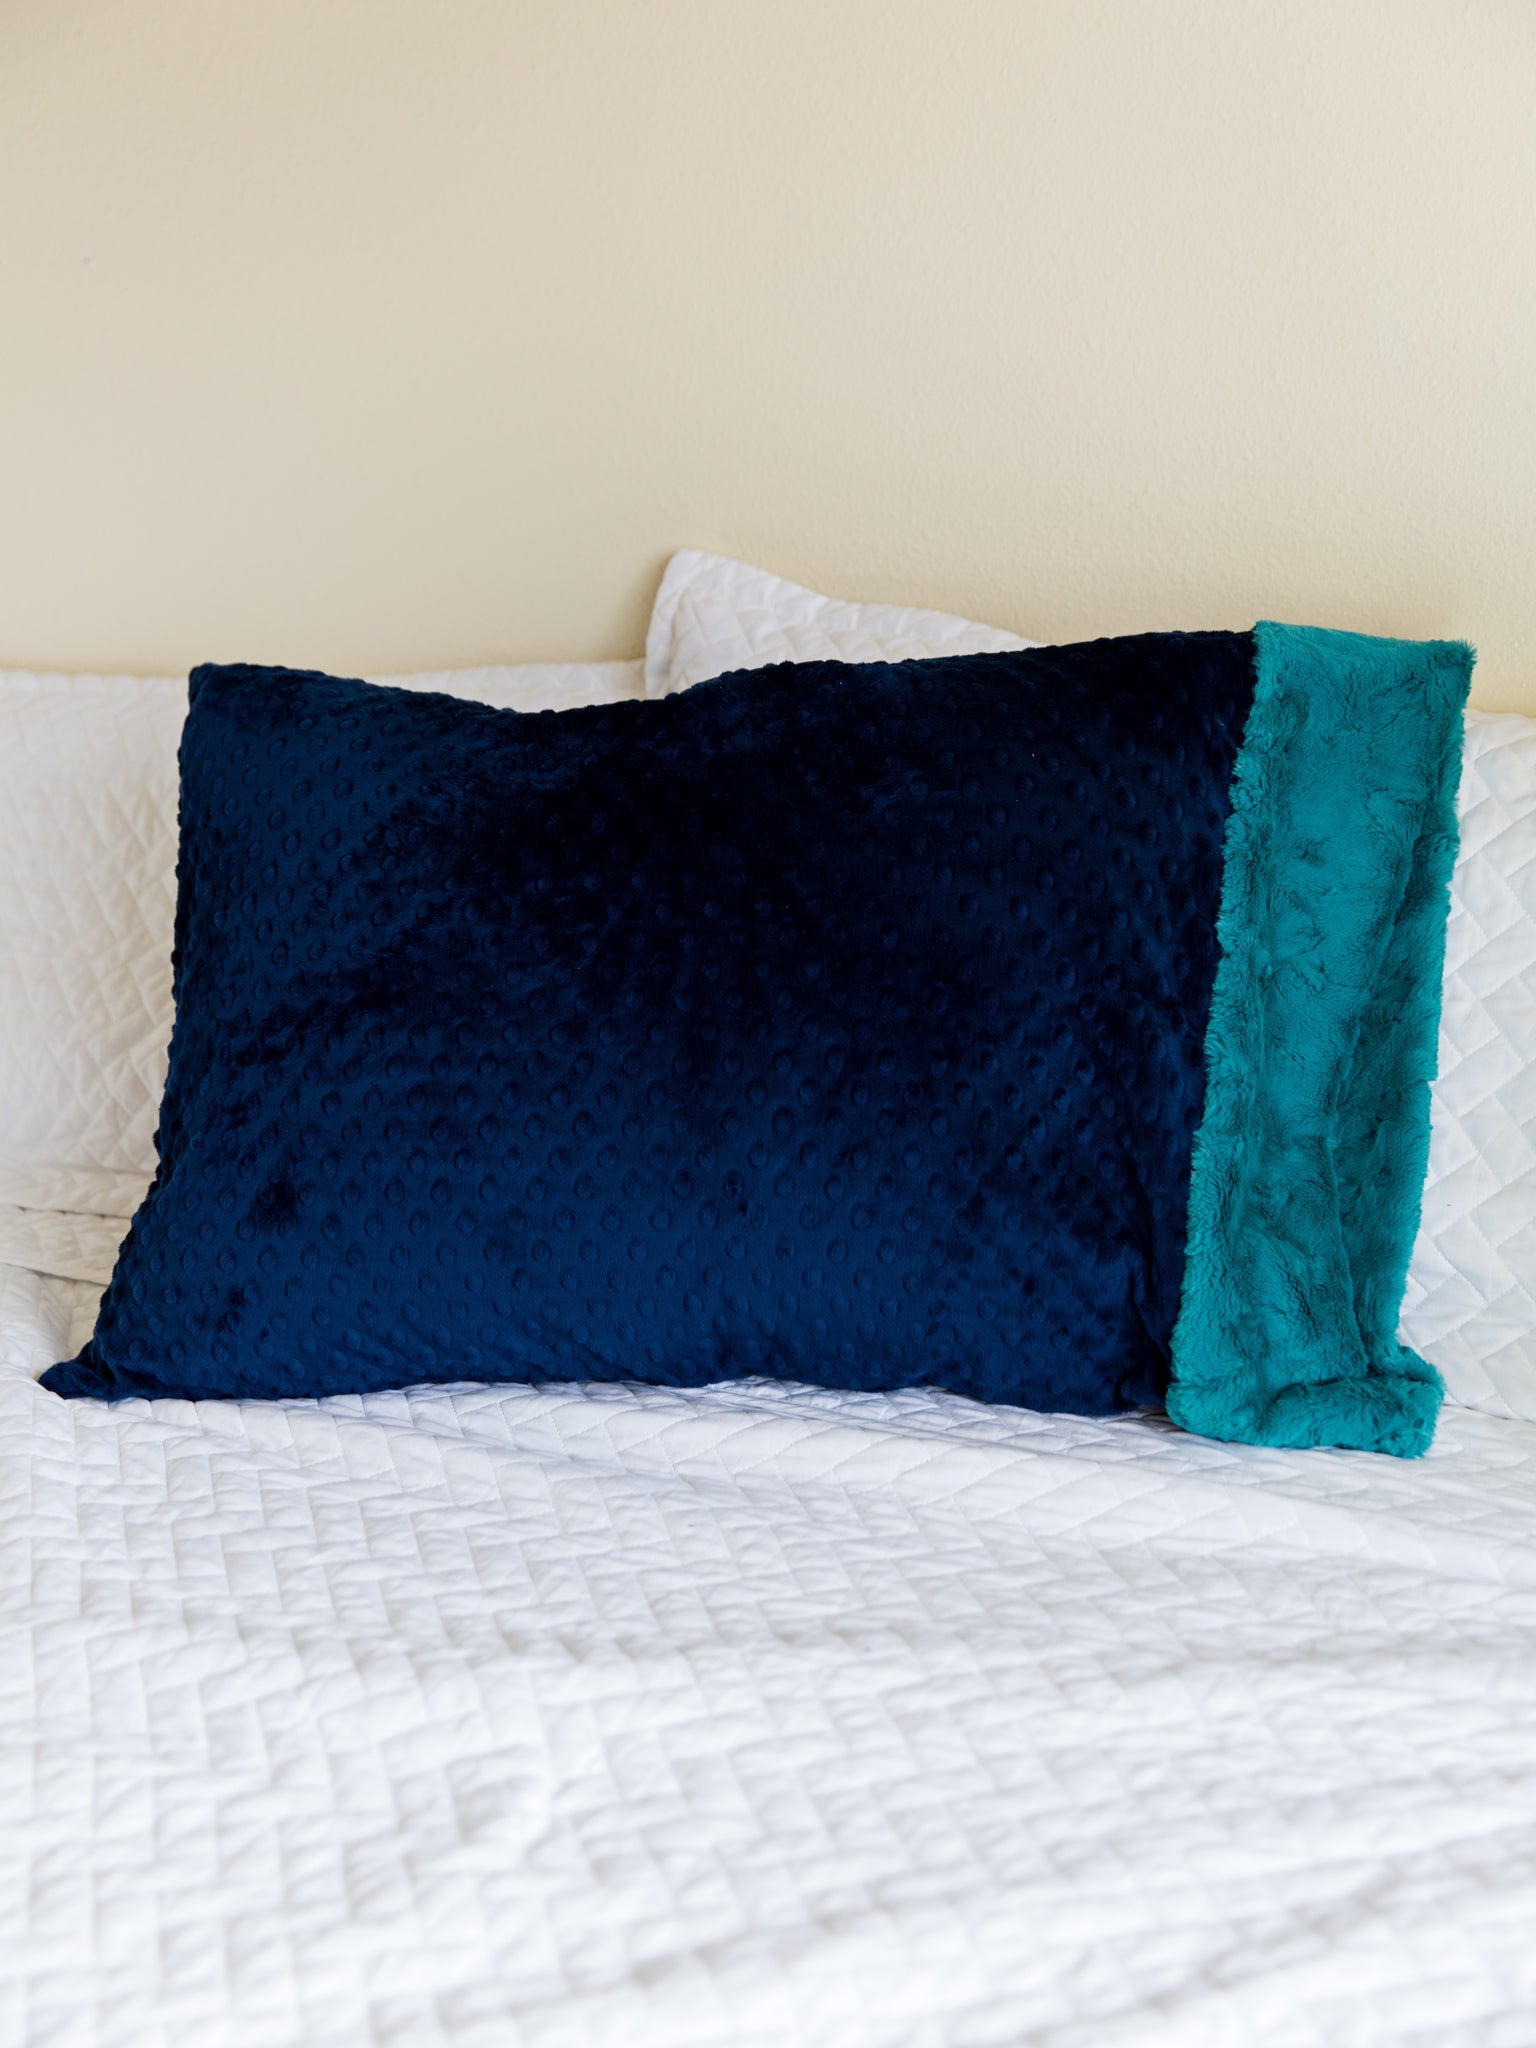 Any Size Cover for the Wedge Pillow Minky Case Pillowcase Post